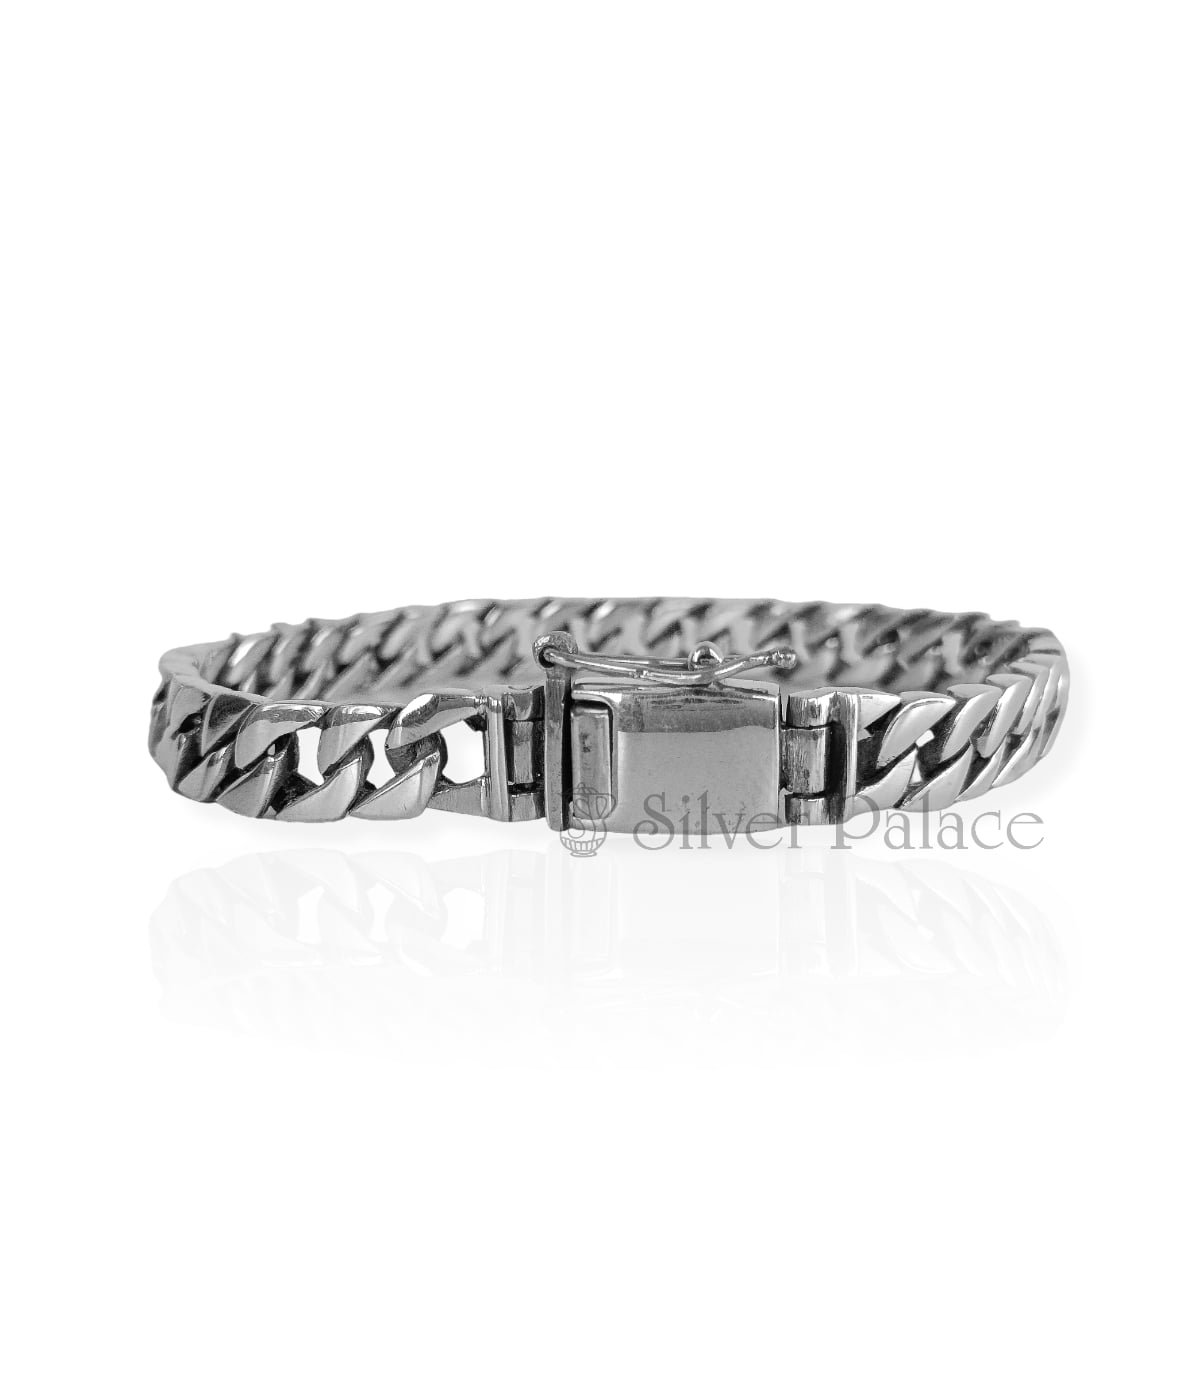 Silver Bracelets for Men  925 Sterling  Size 7 to 11 in  VY Jewelry